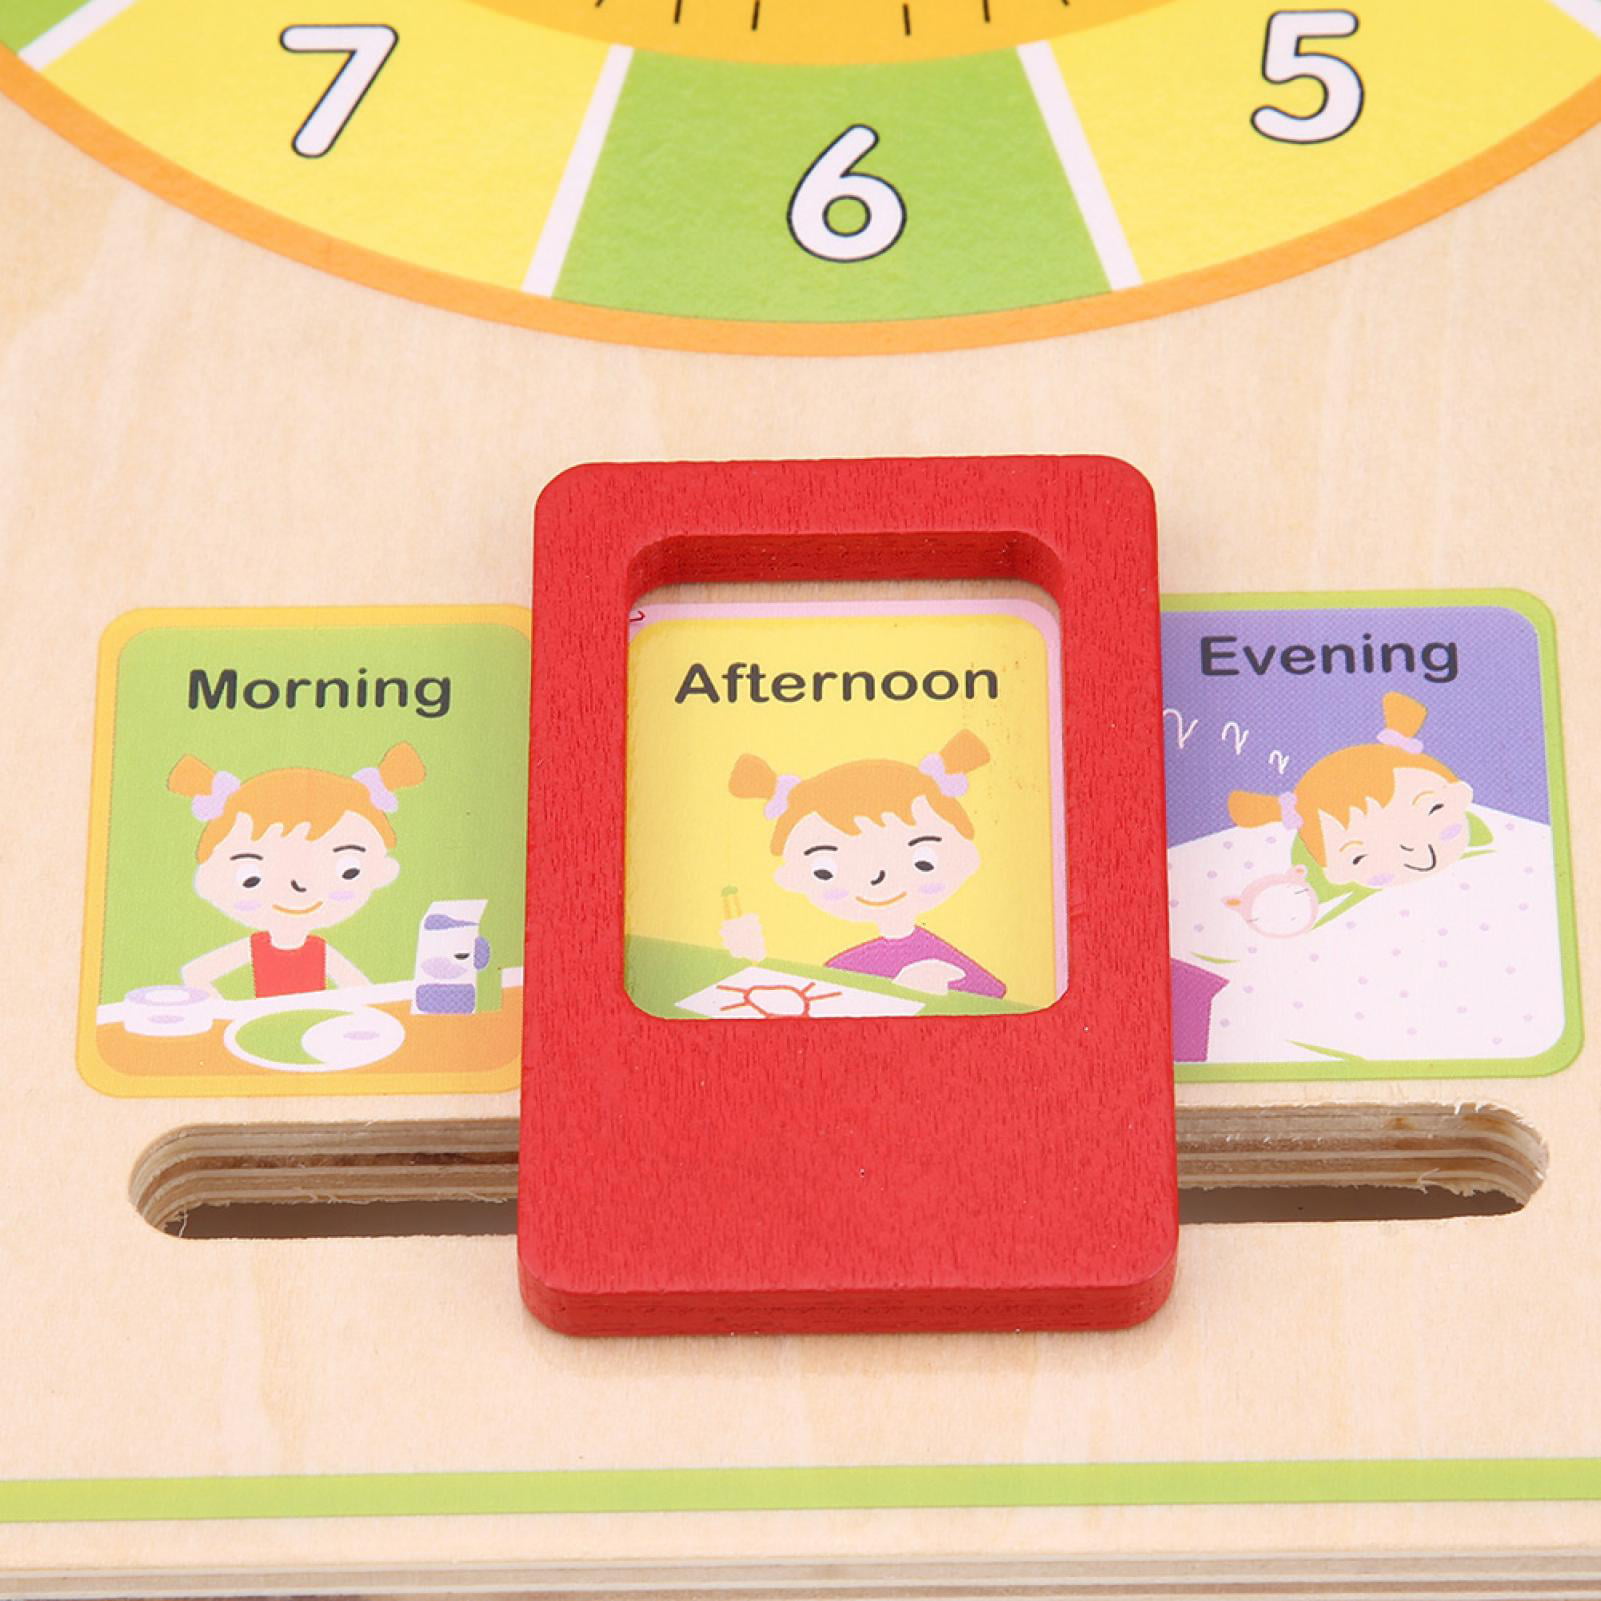 wosume Early Educational Multifunctional Wooden Clock Time Date Season Weather for Kids Children